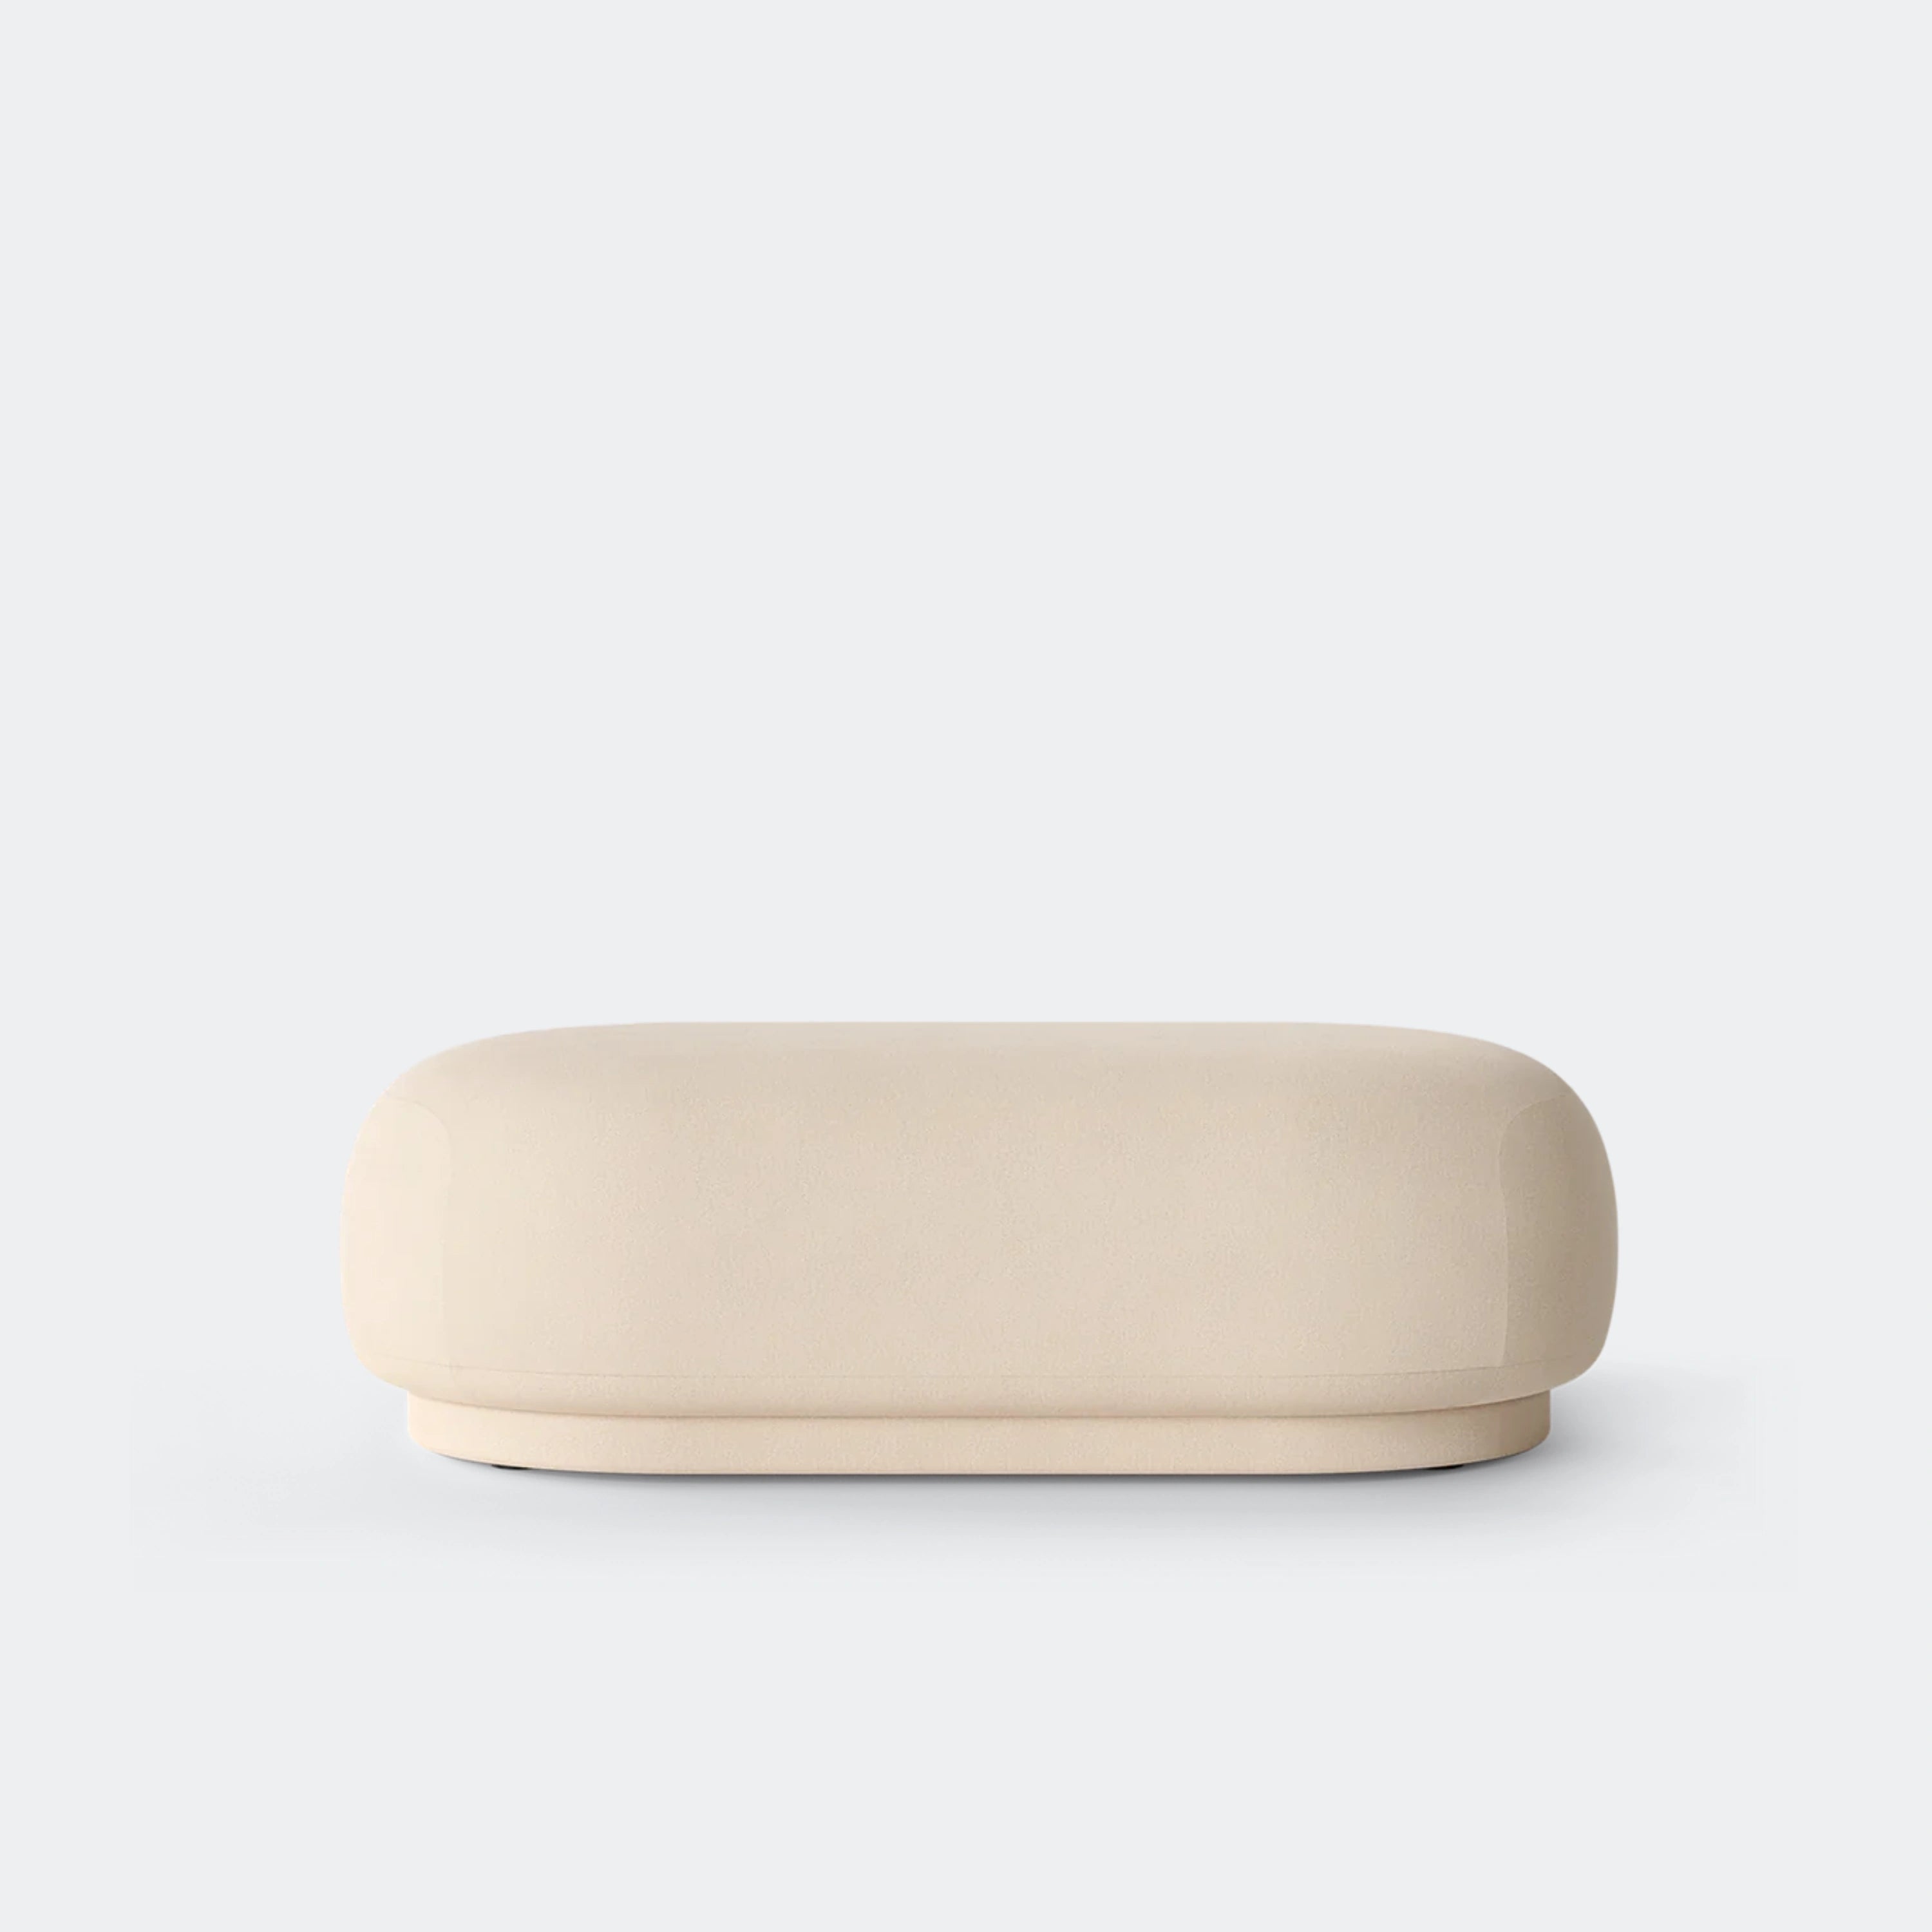 Ferm Living Rico Ottoman Made To Order (12-14 Weeks) Brushed, Off-White - KANSO#Fabric_Brushed, Off-White